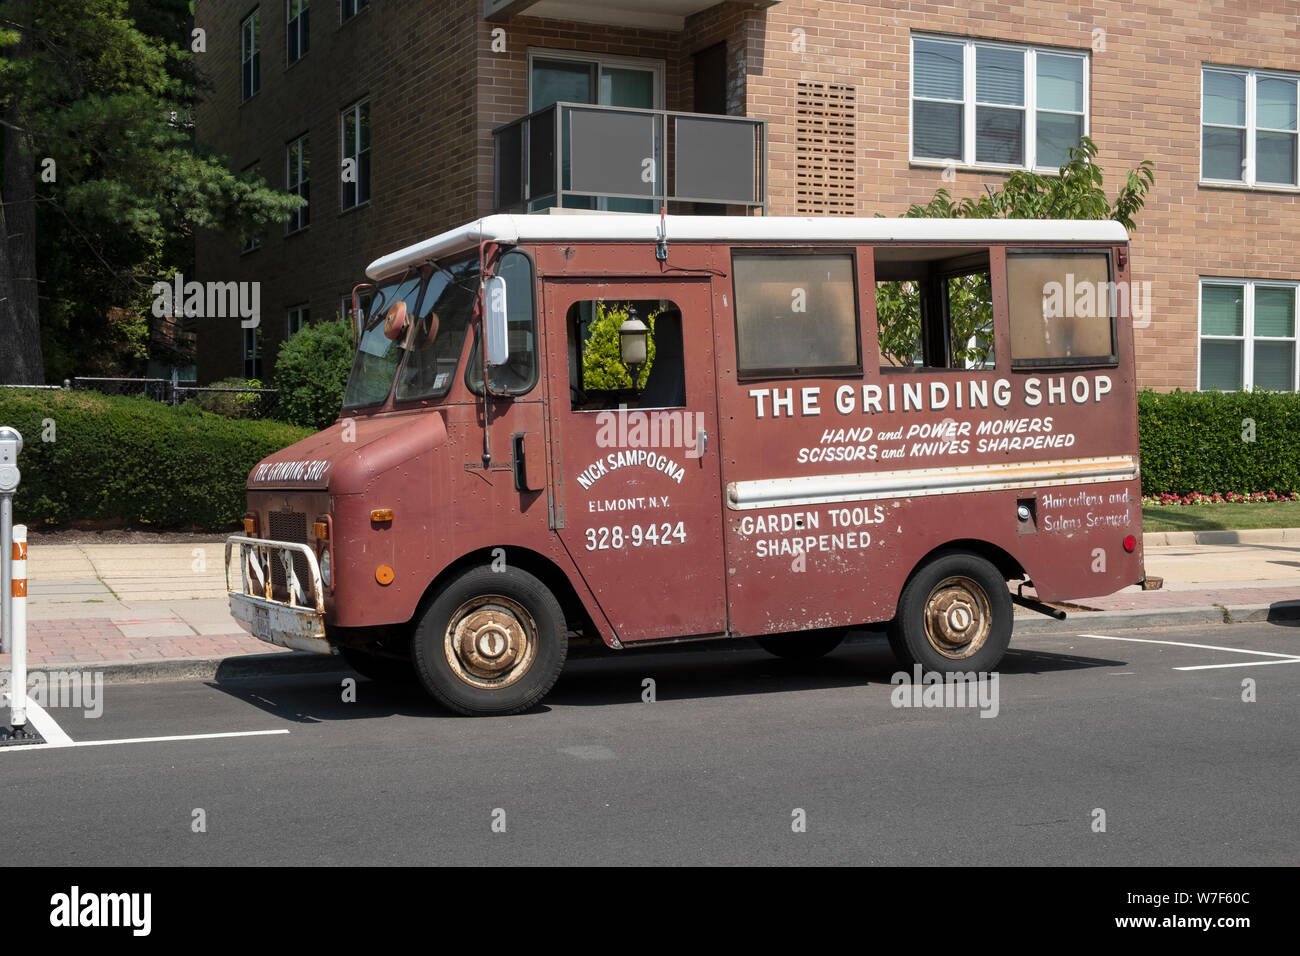 THE GRINDING SHOP, a truck that visits neighborhoods and sharpens knives, scissors and lawn mower blades. In Cedarhurst, Long Island, New York City. Stock Photo